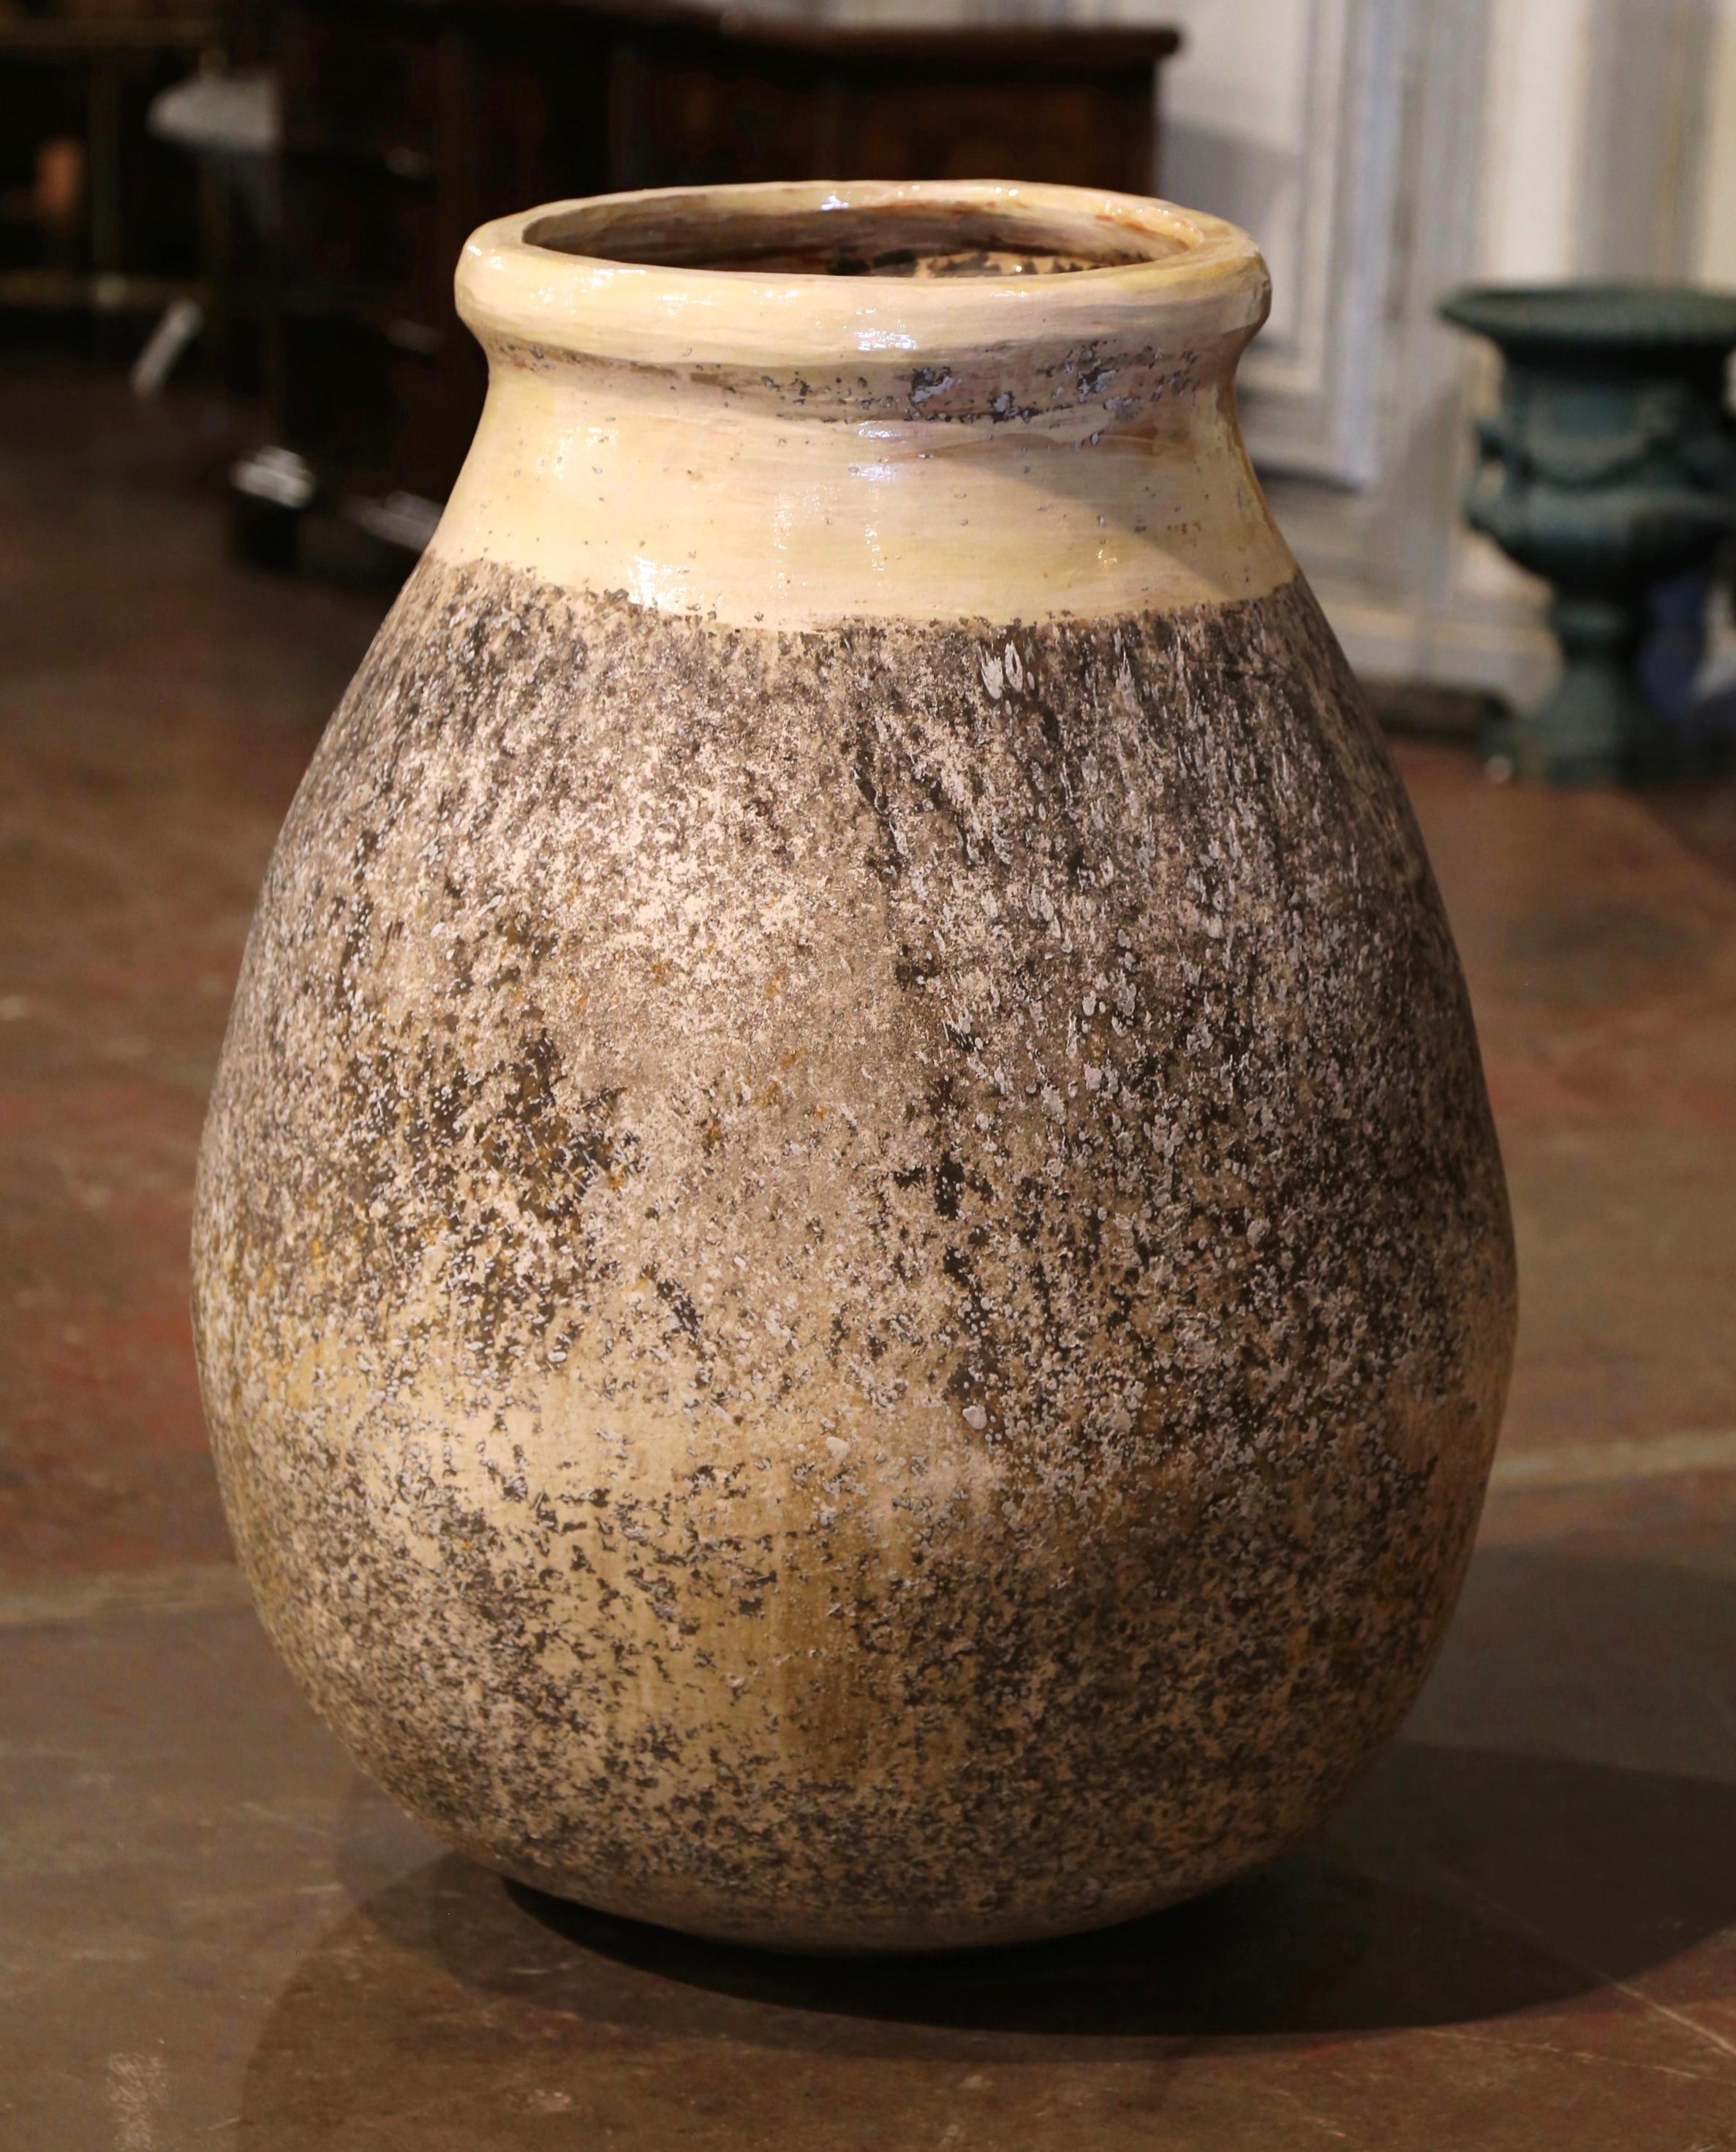 This large, antique earthenware olive jar was created in Biot, Southern France, circa 1970. Made of blond clay and neutral in color, the terracotta vase has a traditional round bulbous shape. The rustic, time-worn pot features a pale ochre glaze